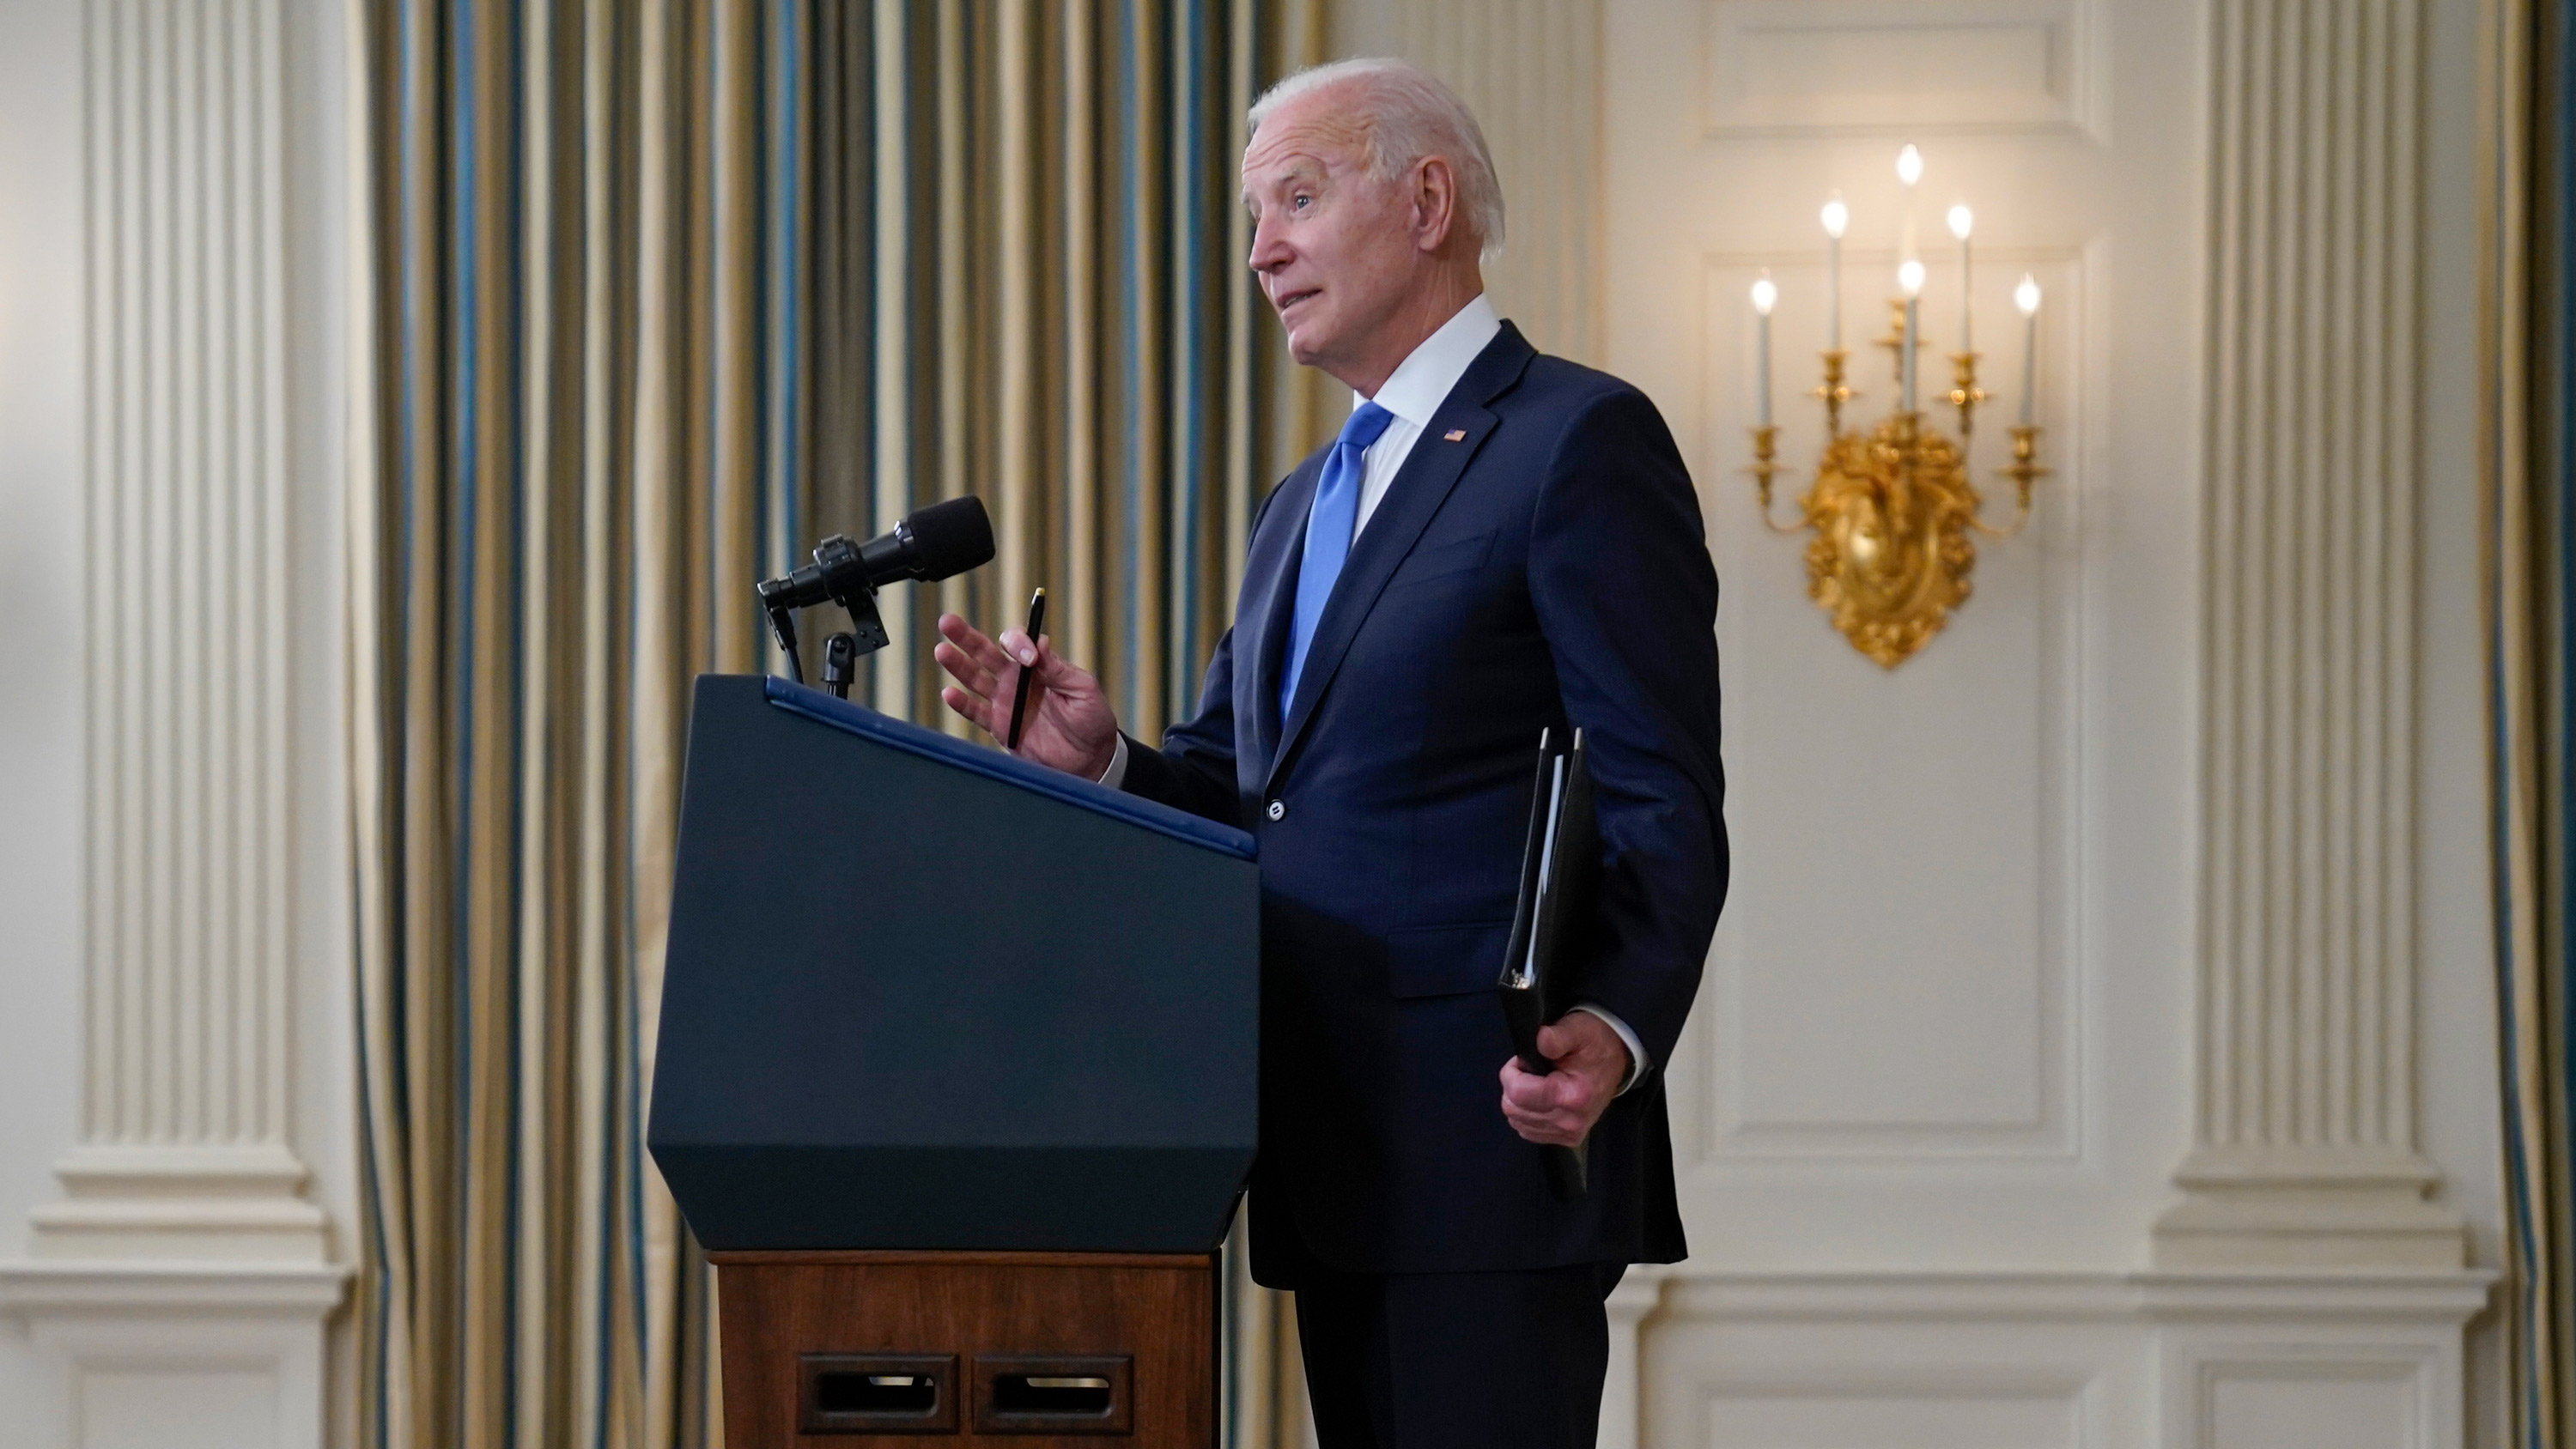 President Joe Biden takes questions from reporters as he speaks about the American Rescue Plan, in the State Dining Room of the White House on May 5 in Washington, DC.